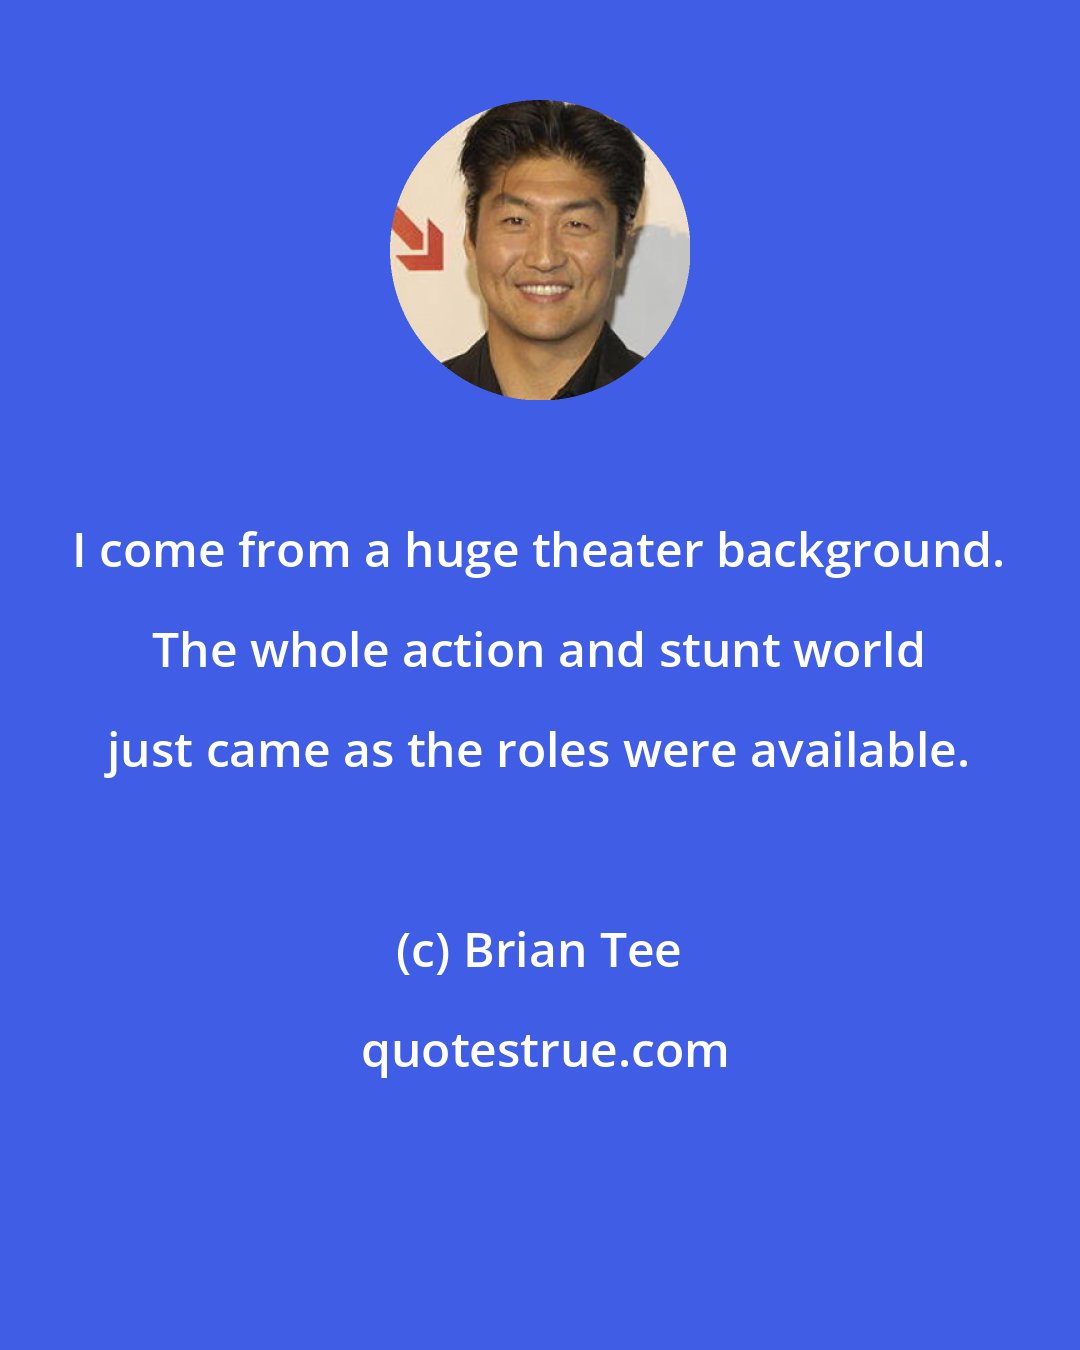 Brian Tee: I come from a huge theater background. The whole action and stunt world just came as the roles were available.